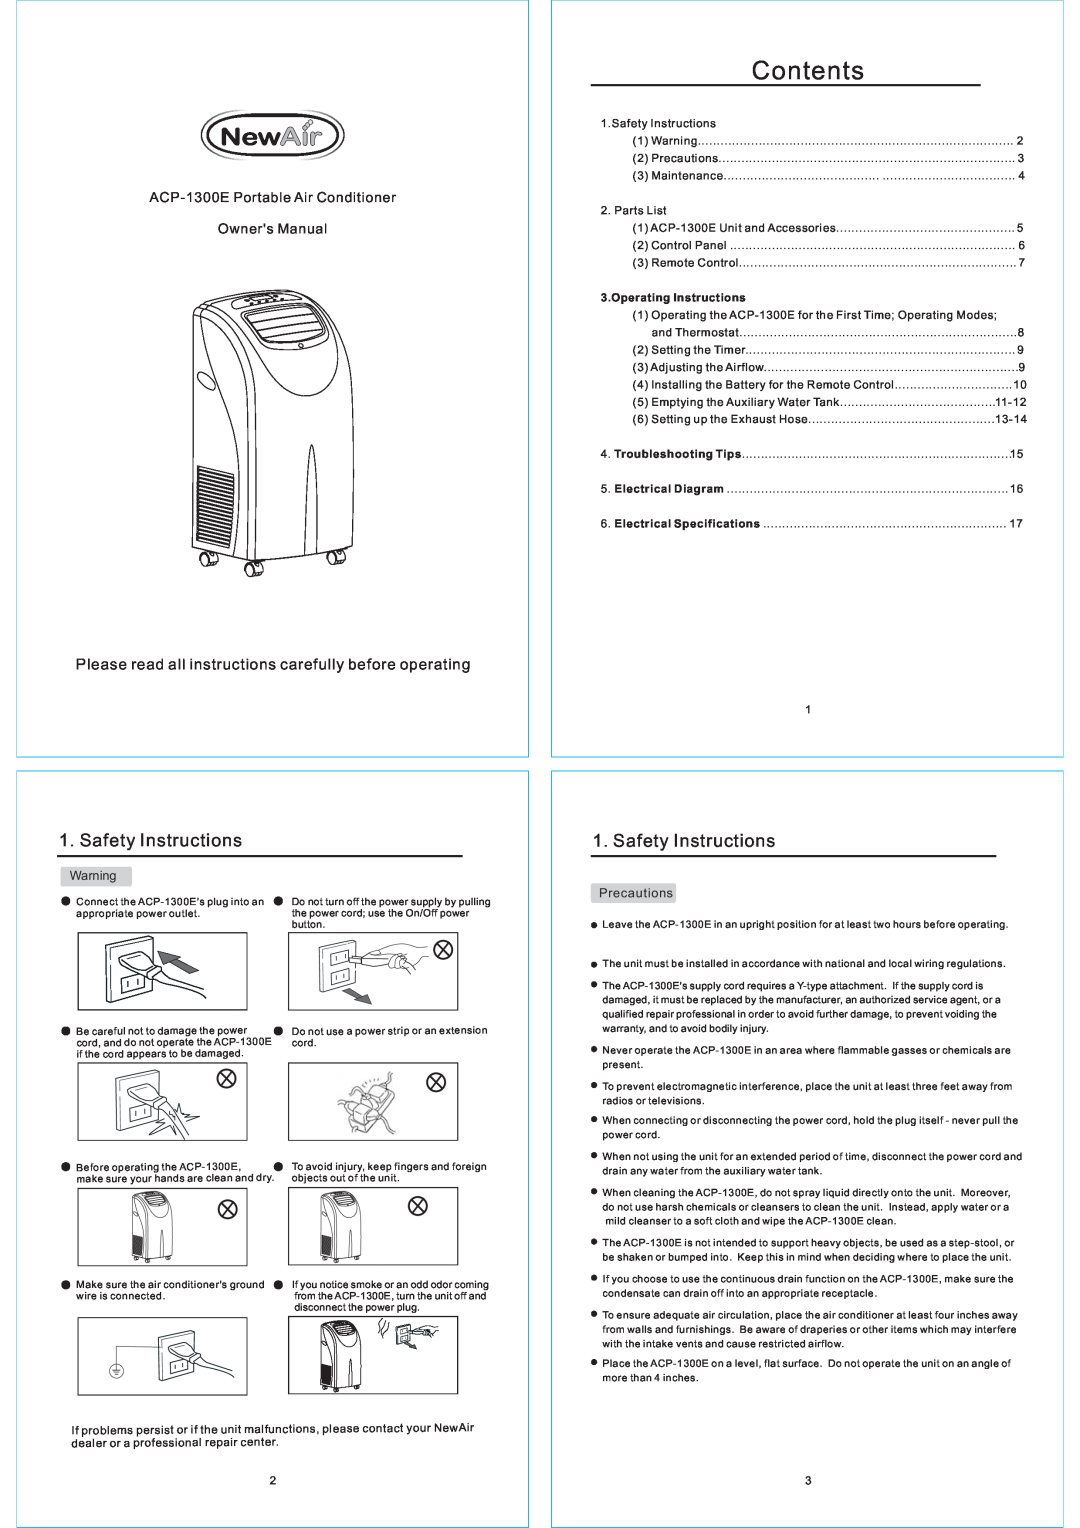 NewAir owner manual Safety Instructions, ACP-1300EPortable Air Conditioner, Operating Instructions 